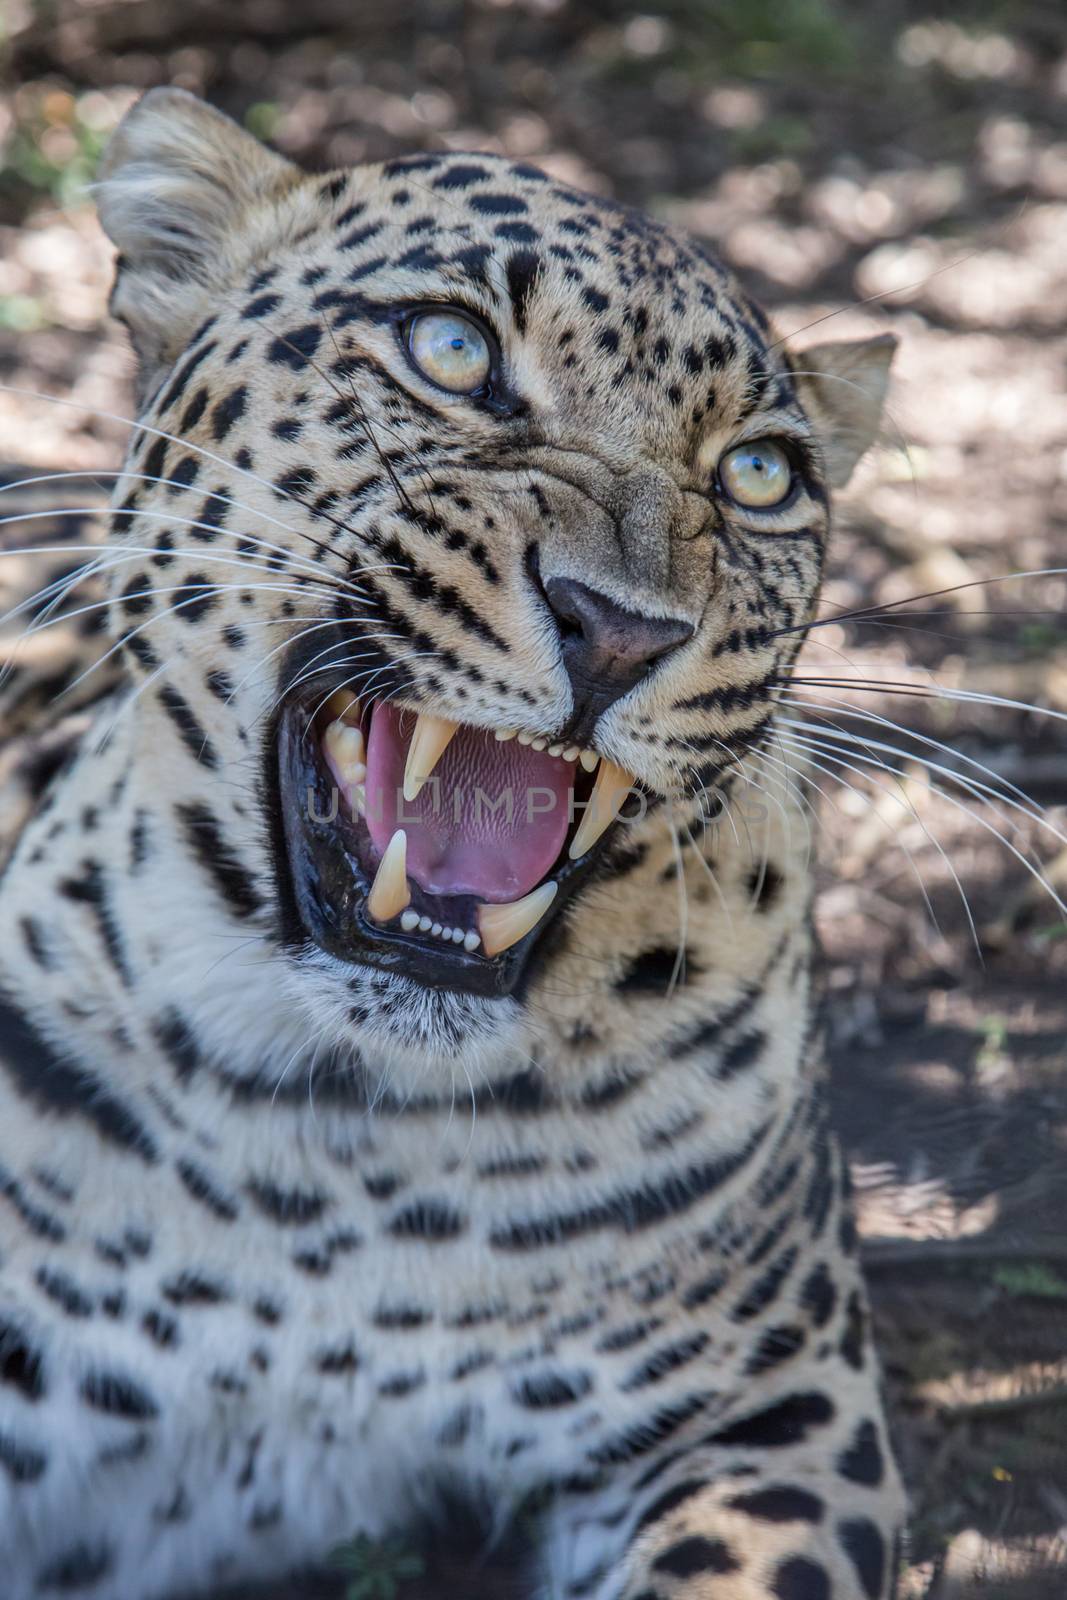 Snarling Leopard with Huge Teeth by fouroaks